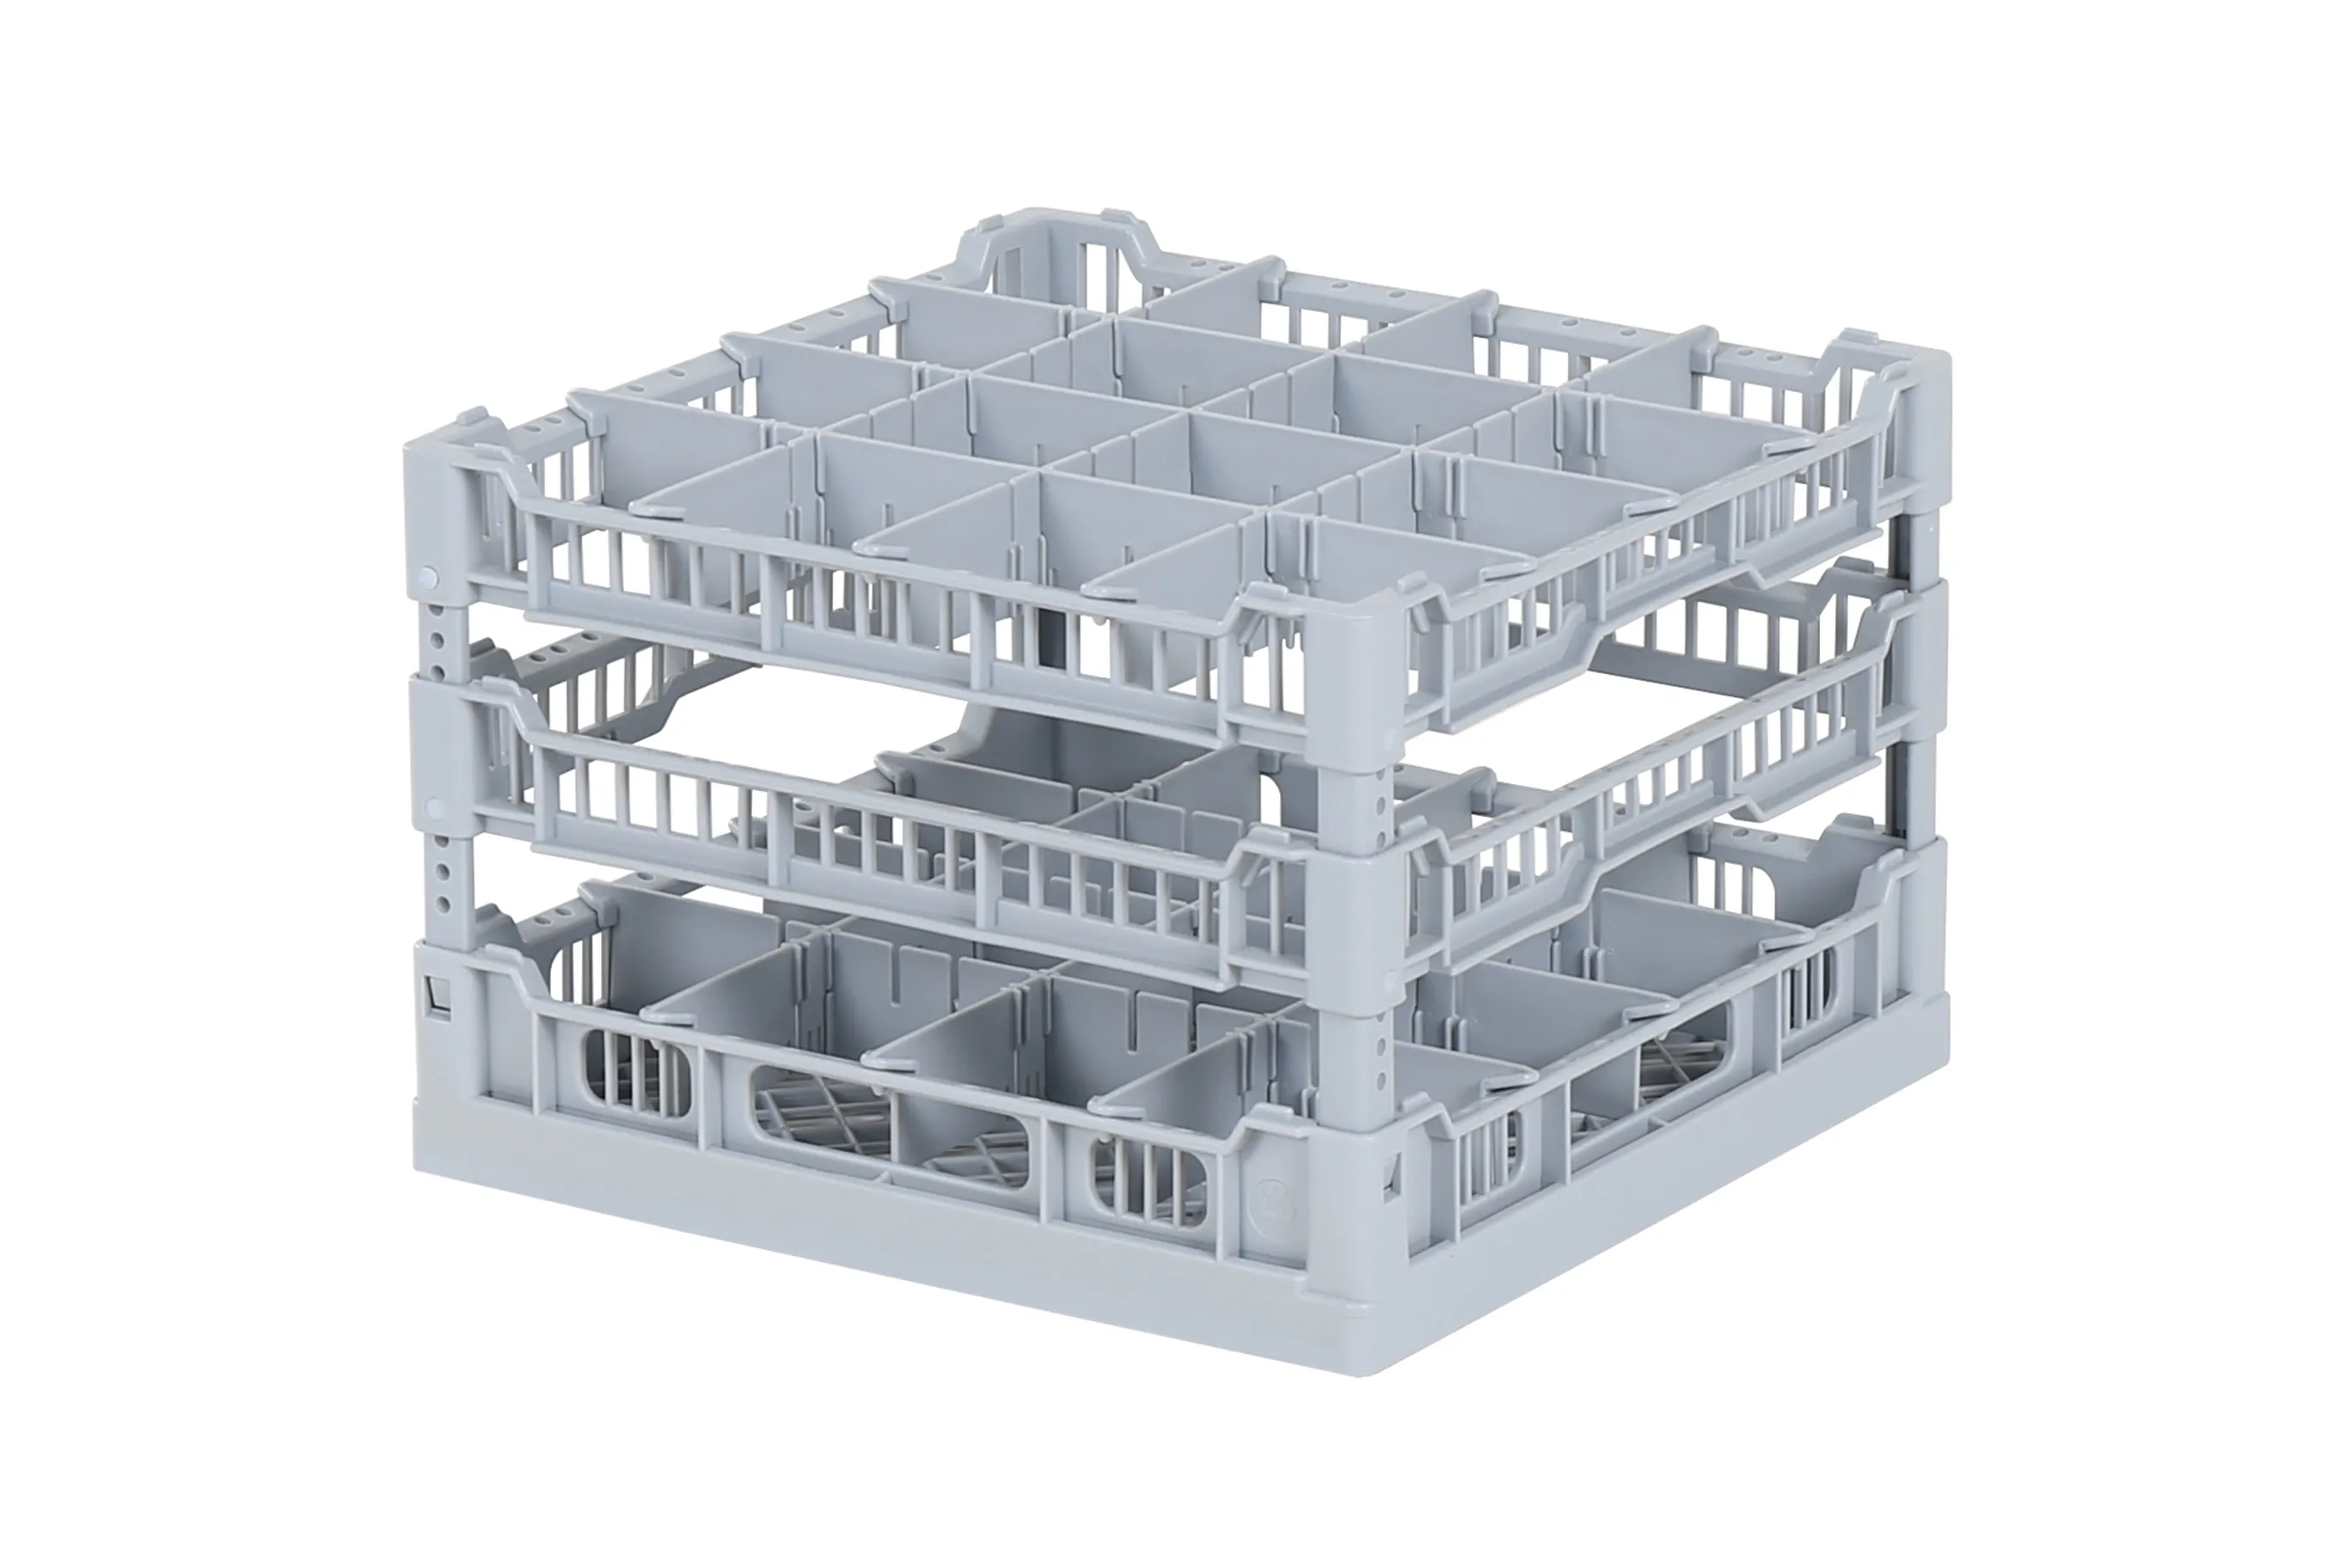 Dishwasher basket 400 x 400 mm - for glass heights from 191 to 240 mm - with 4 x 4 compartmentalization - maximum glass diameter 88mm